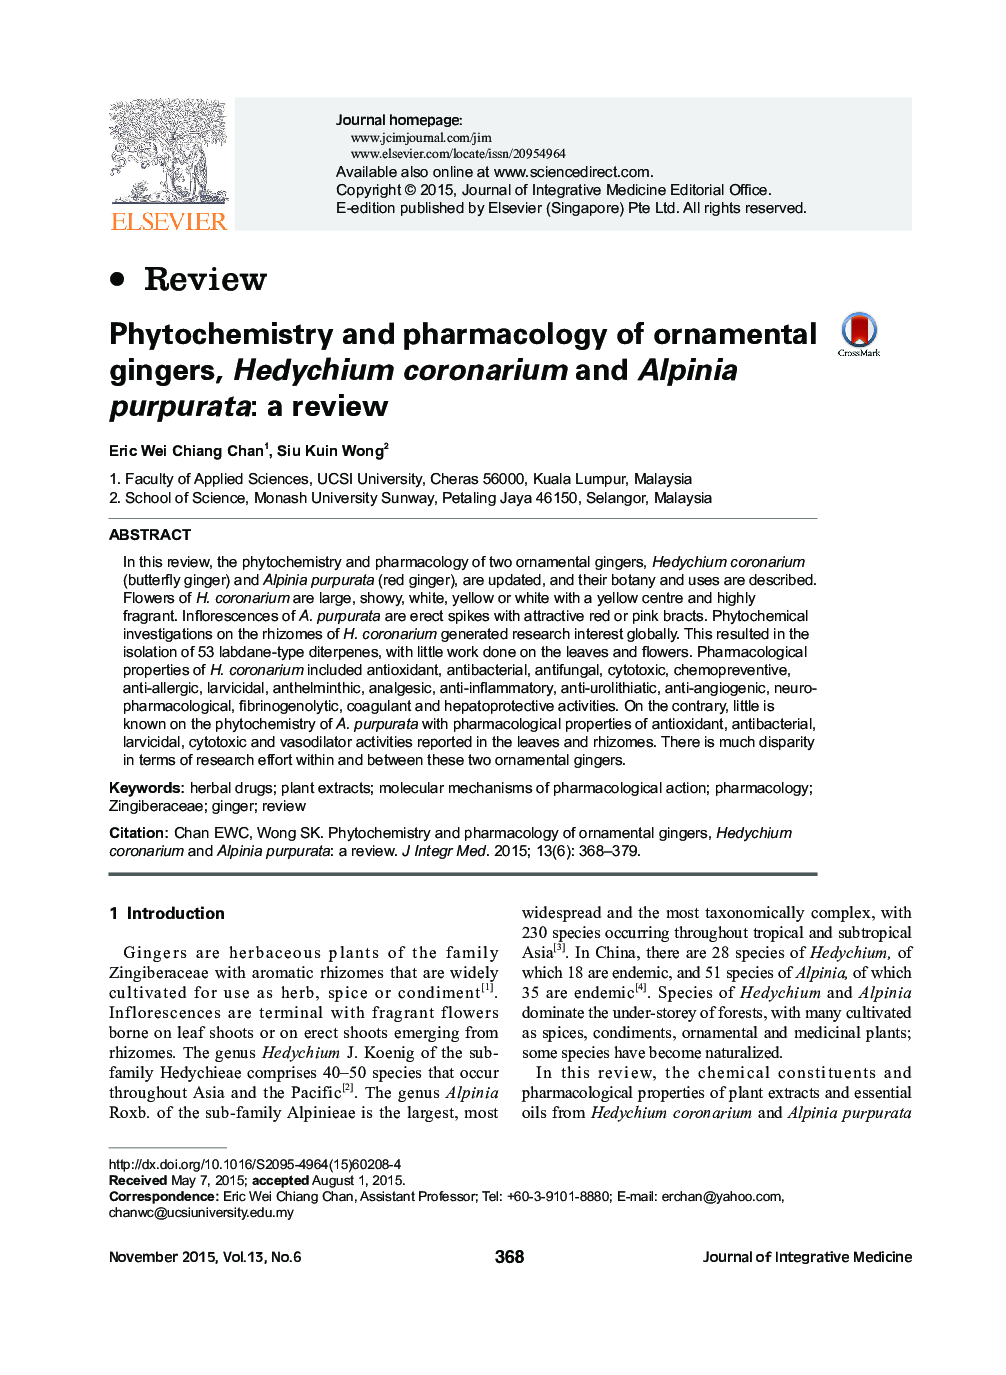 Phytochemistry and pharmacology of ornamental gingers, Hedychium coronarium and Alpinia purpurata: a review